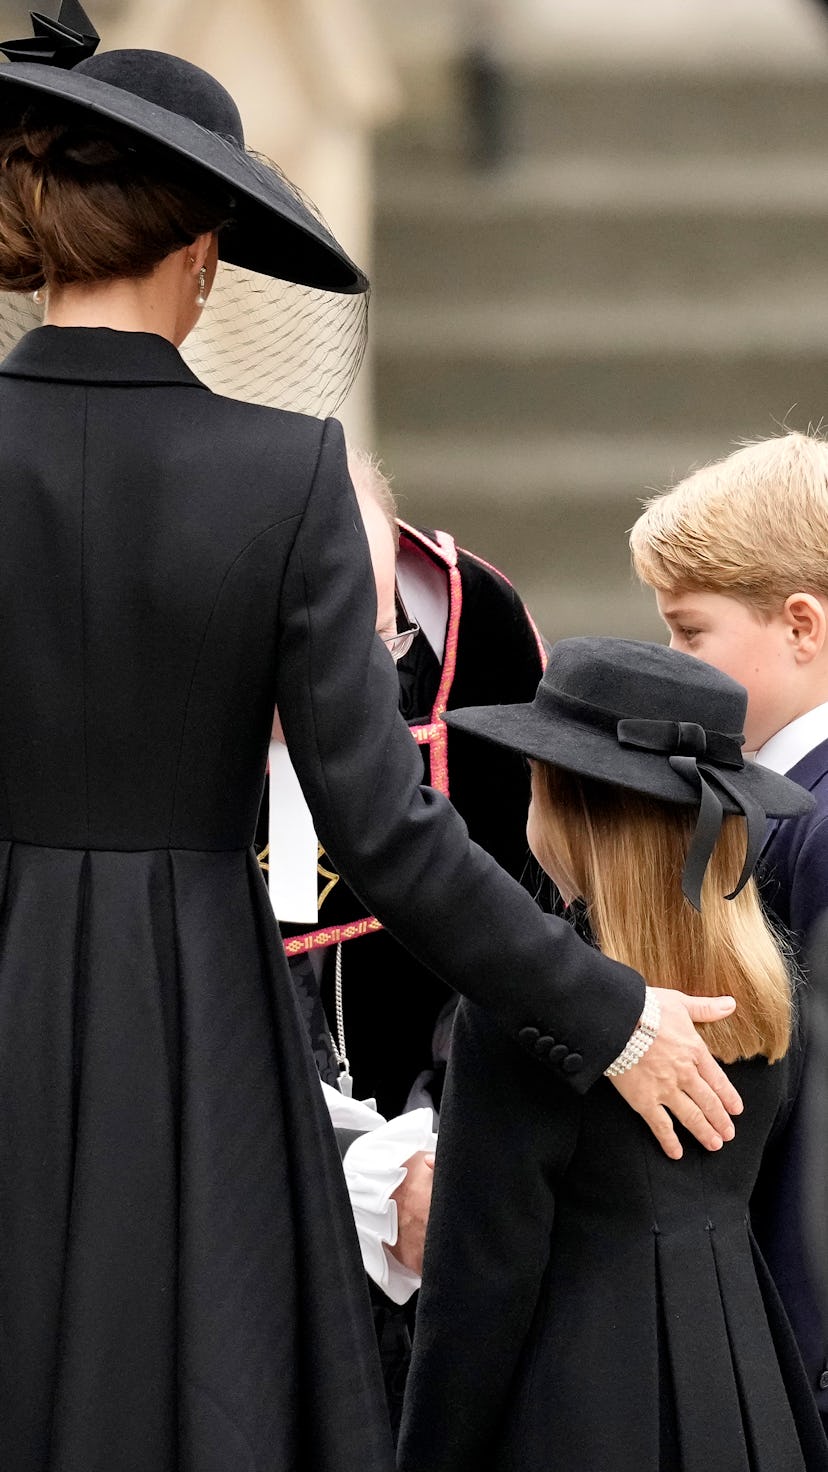 The royal family's outfits at Queen Elizabeth's funeral.